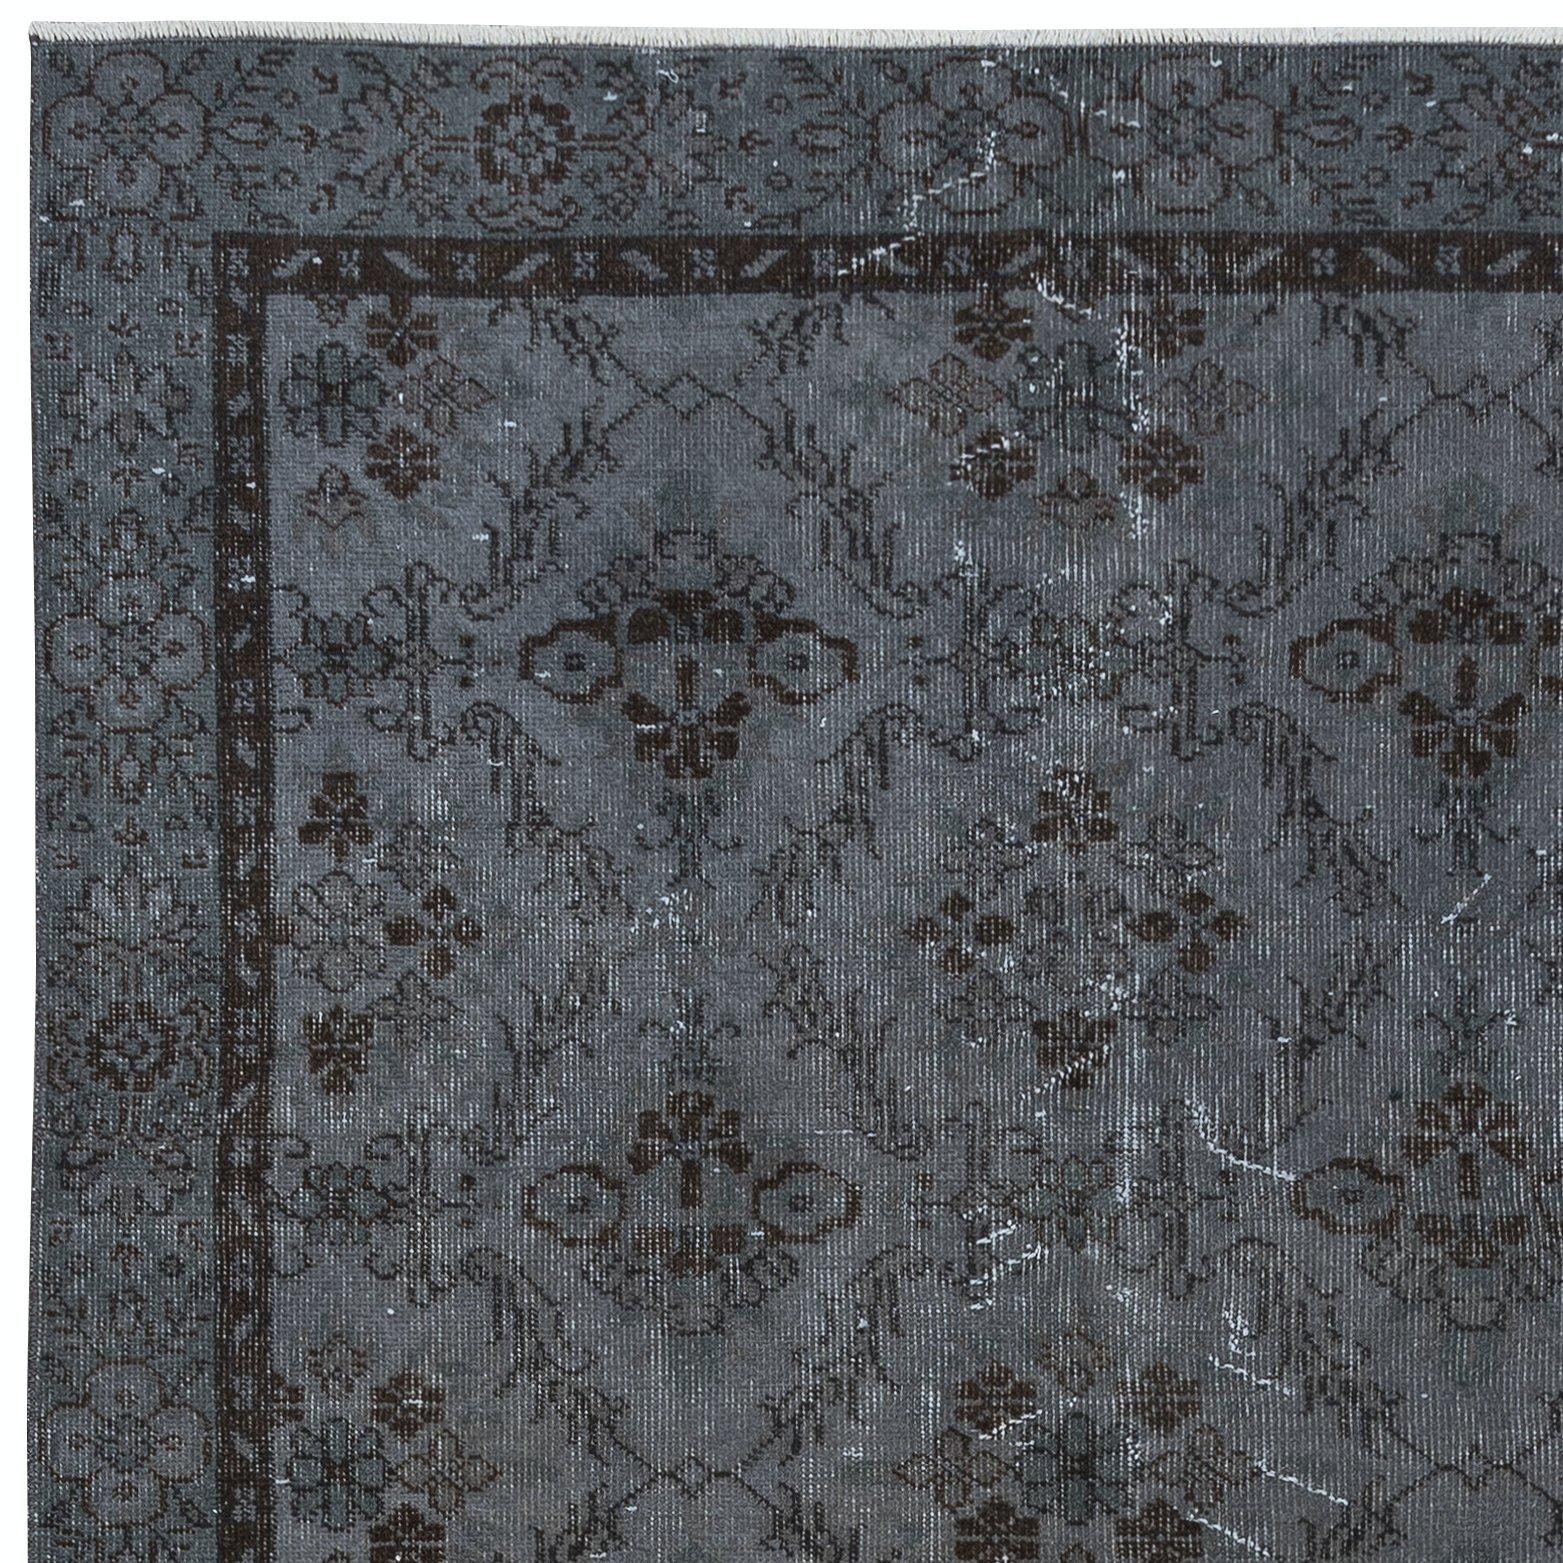 Turkish 4.8x8.4 Ft Authentic Handmade Rug, Floral Pattern Upcycled Carpet in Pure Gray For Sale